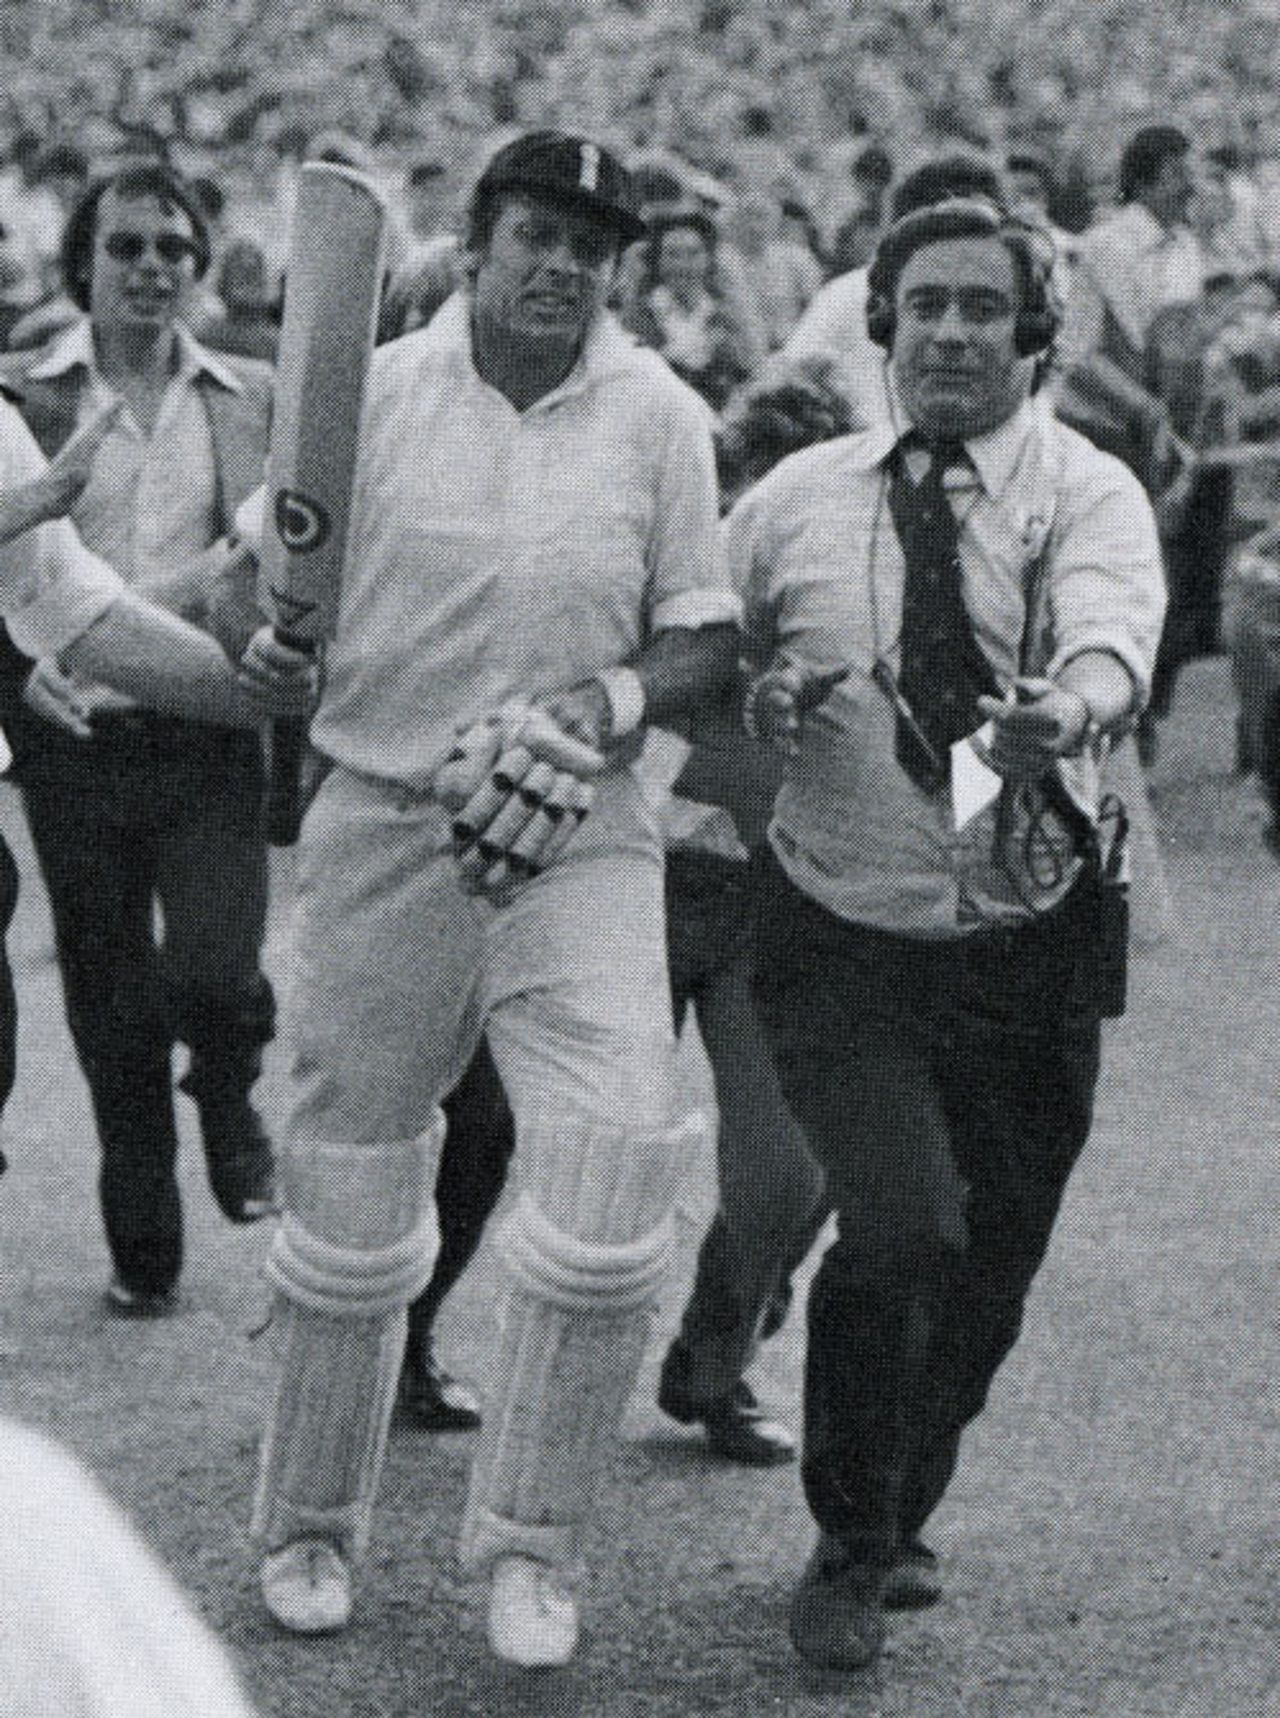 Geoff Boycott leaves the field at the close of play after reaching his 100th hundred, England v Australia, 4th Test, Headingley, 1977